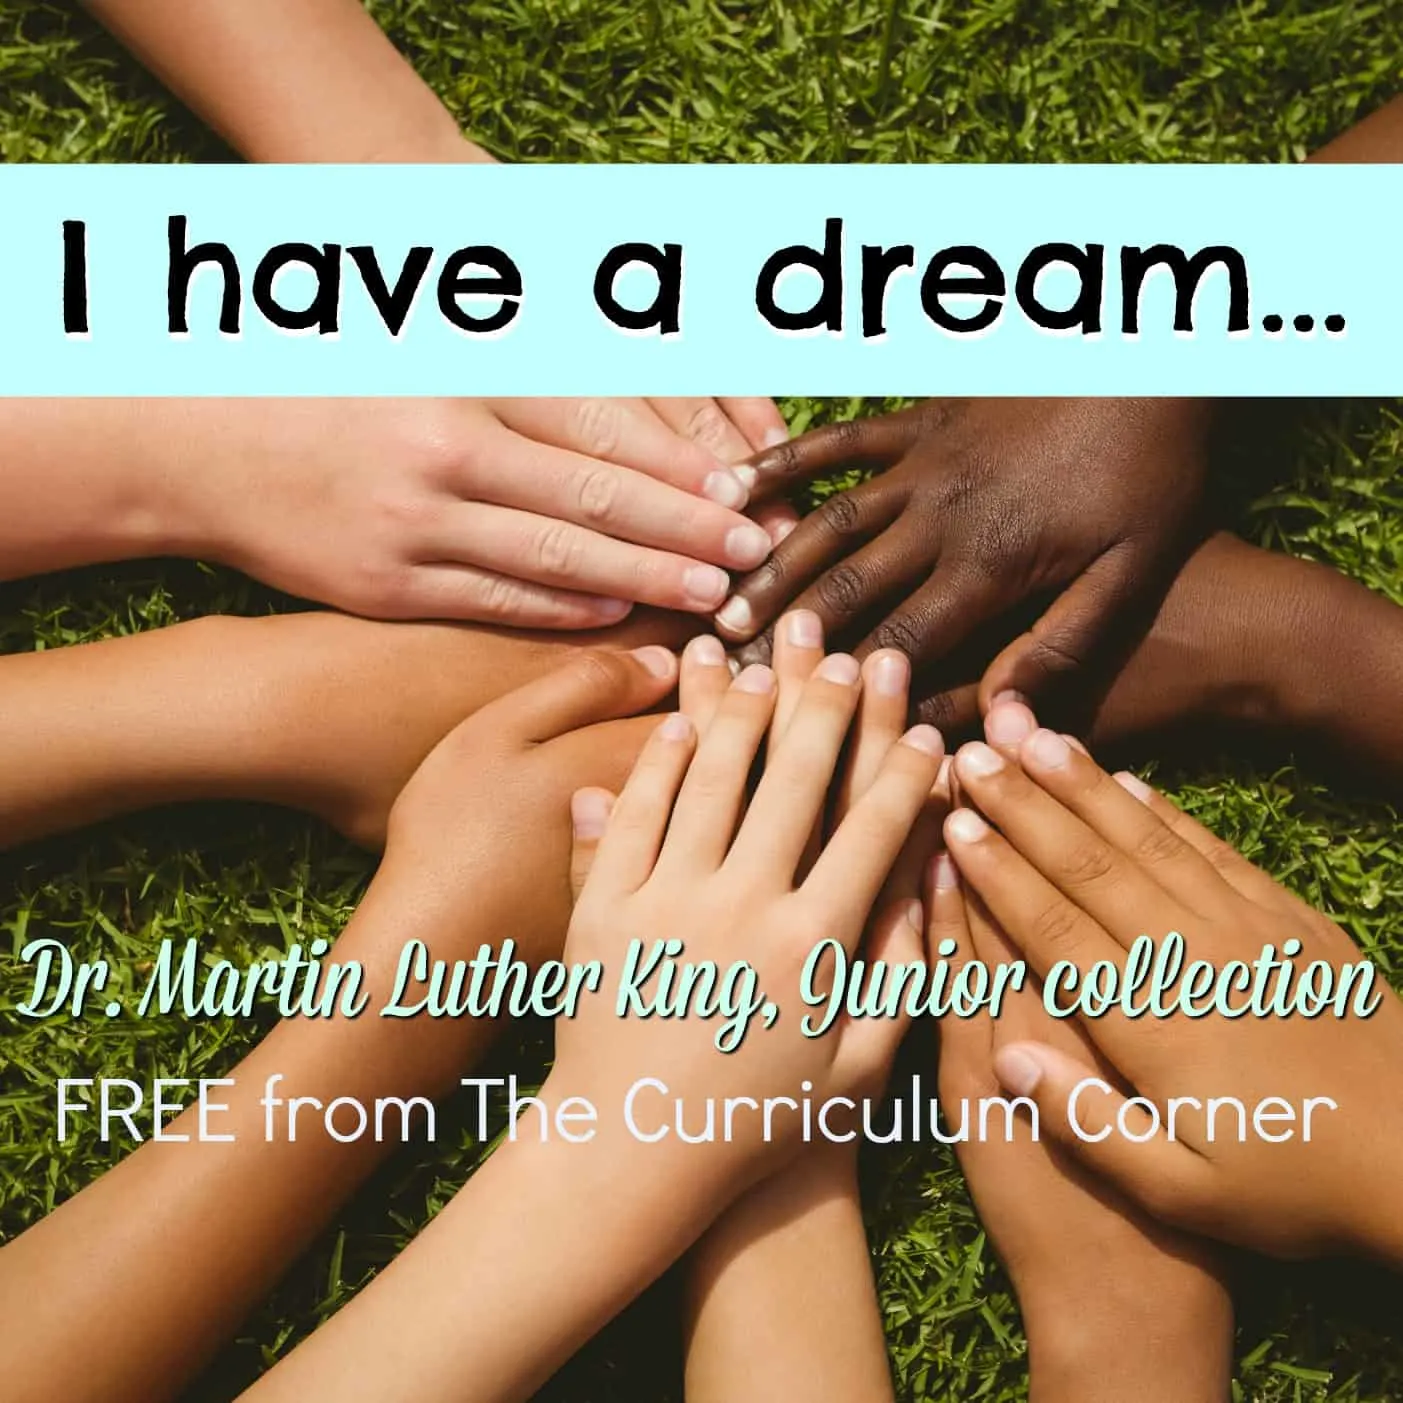 FREE collection of Dr. Martin Luther King, Jr. literacy resources created by The Curriculum Corner | Black History Month | FREEBIES | literacy activities